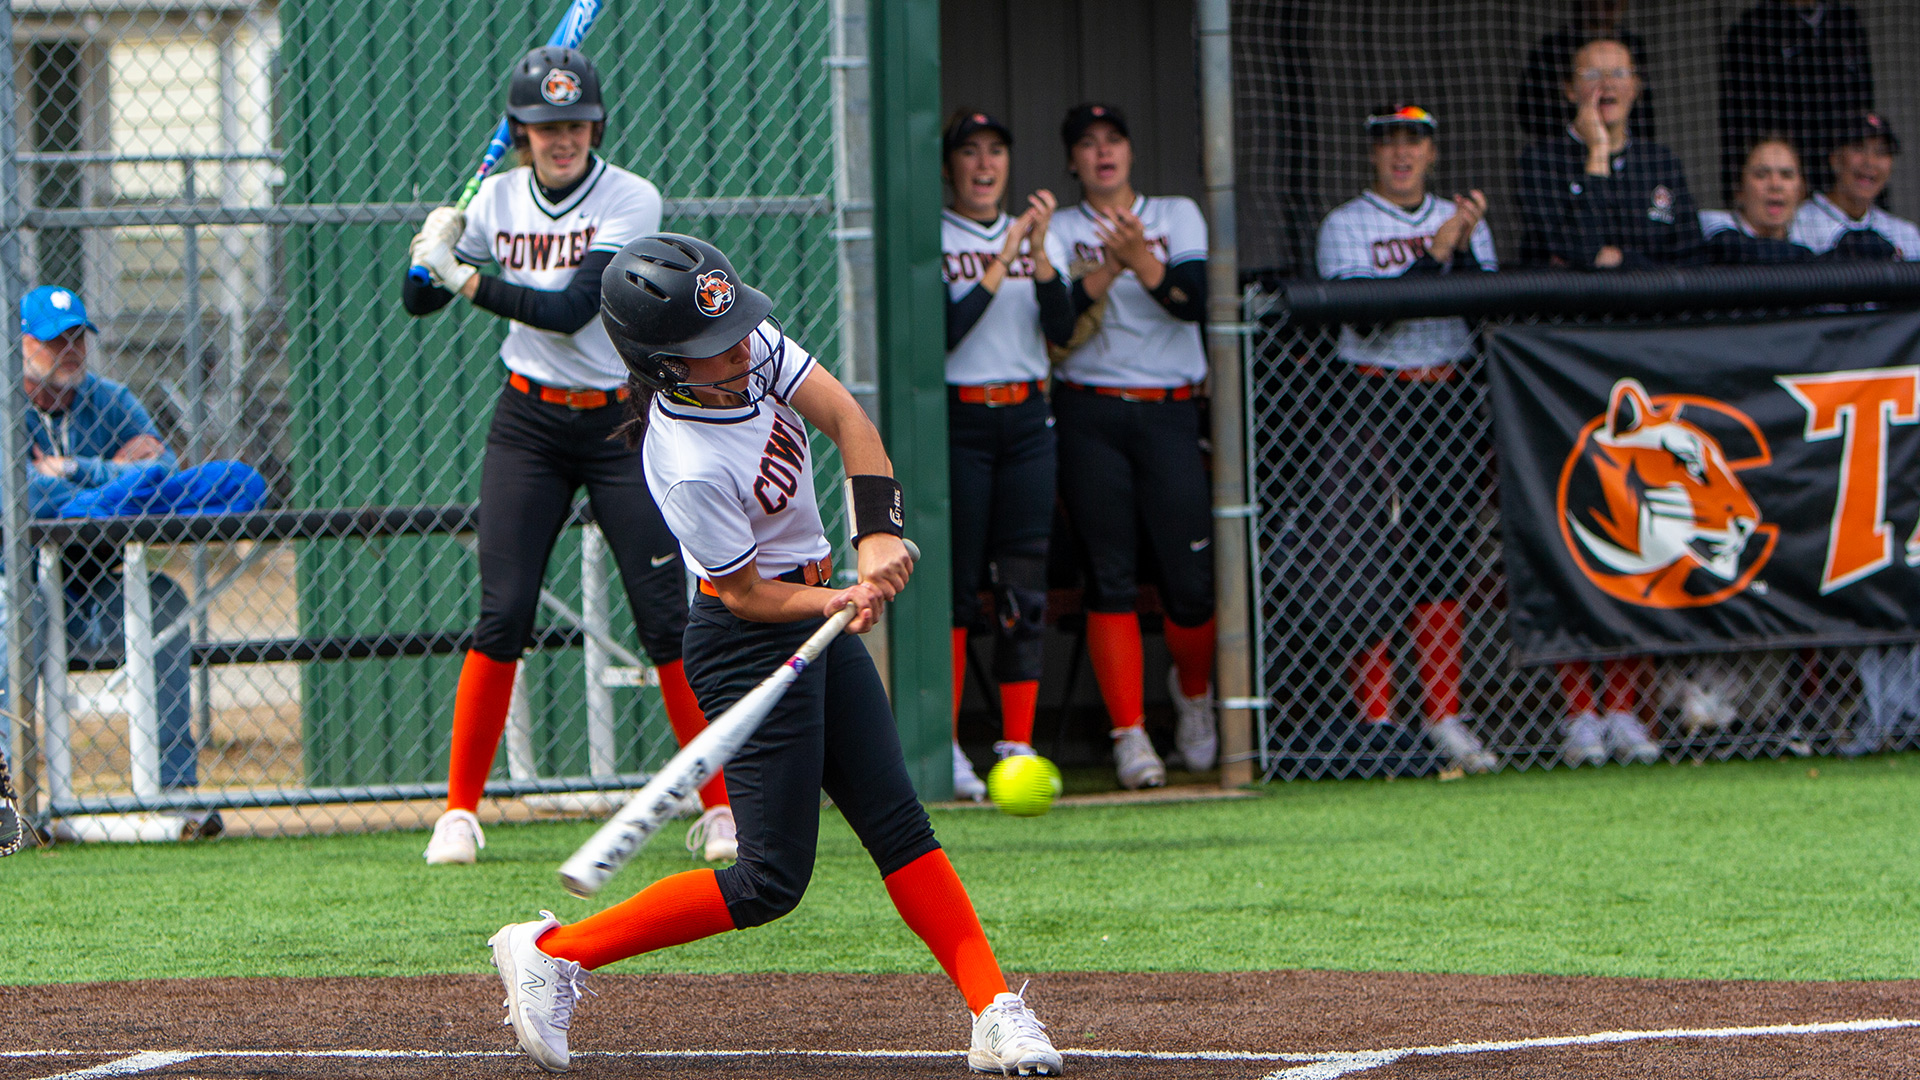 Cowley softball team scores 36 runs in two-game sweep at Allen